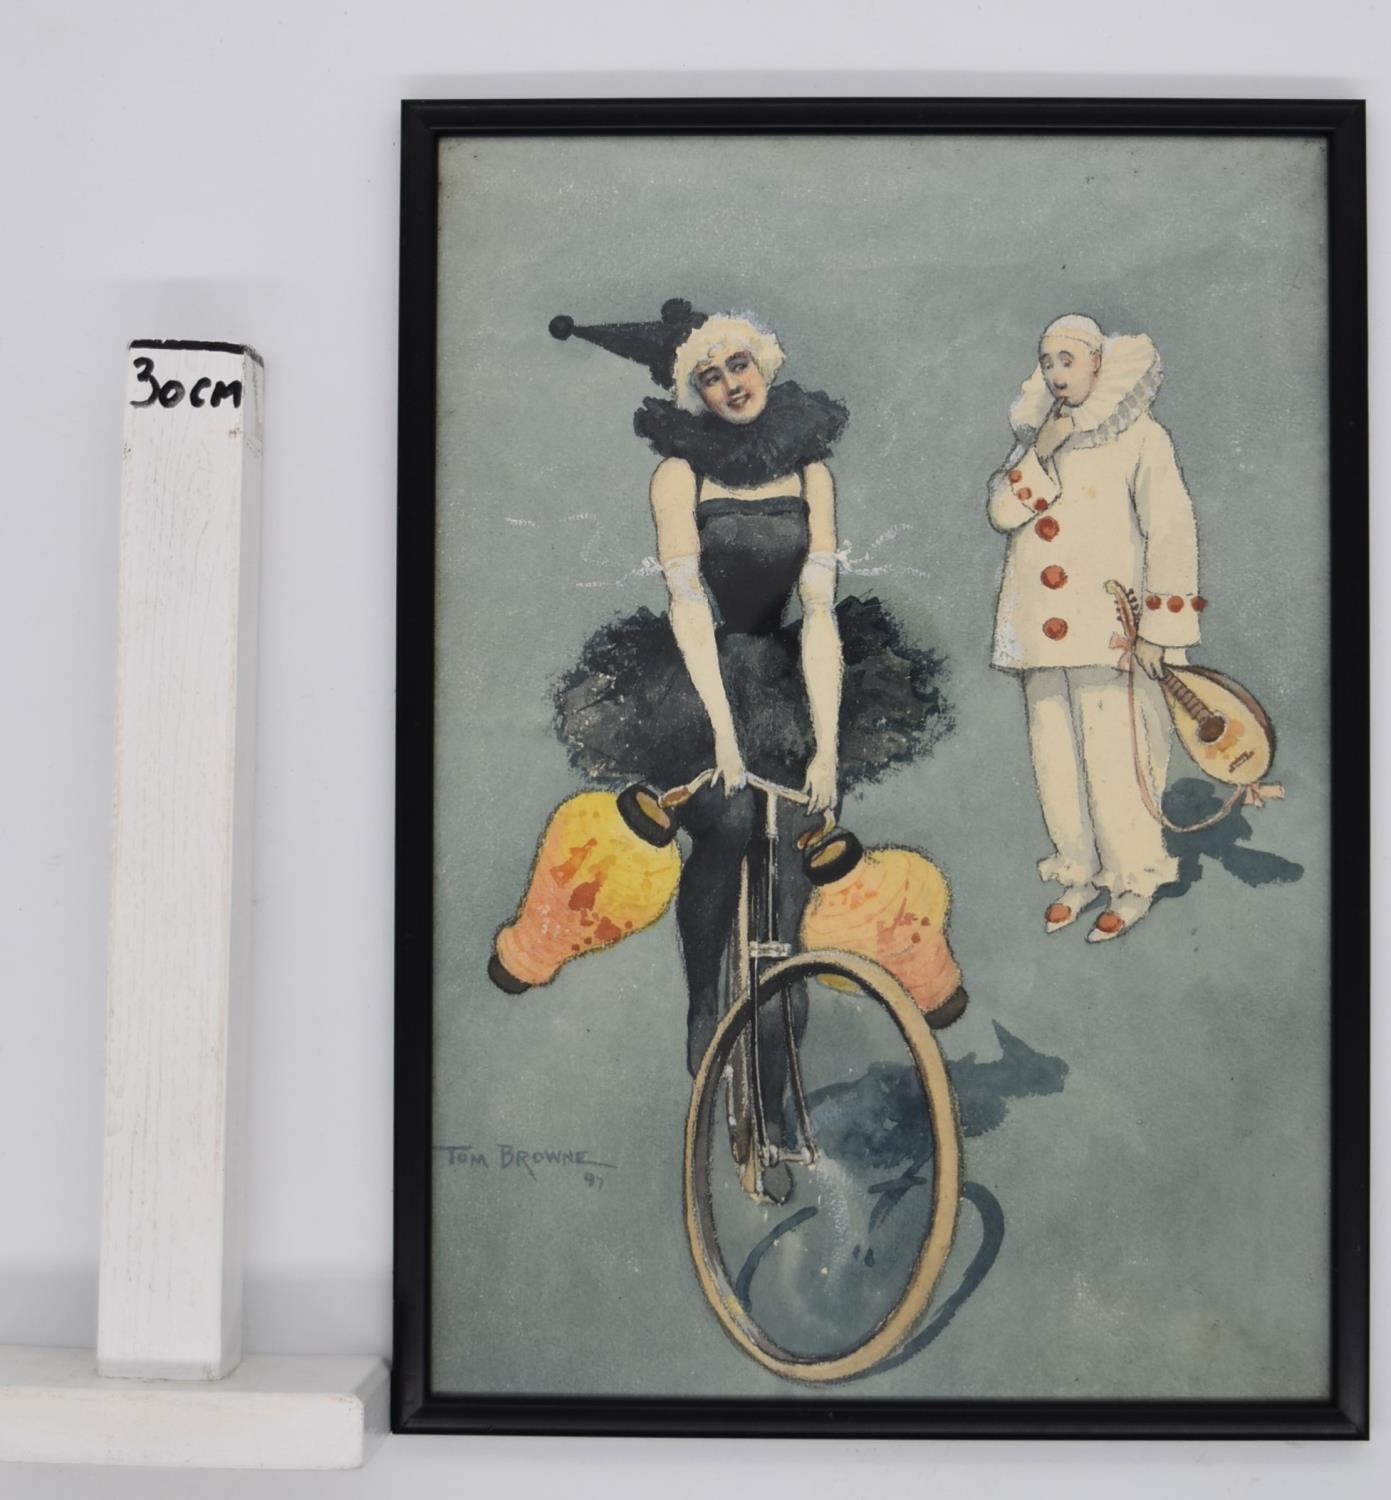 Tom Browne (1870 - 1910; British), Dancer riding bike with male clown holding an instrument, - Image 3 of 5